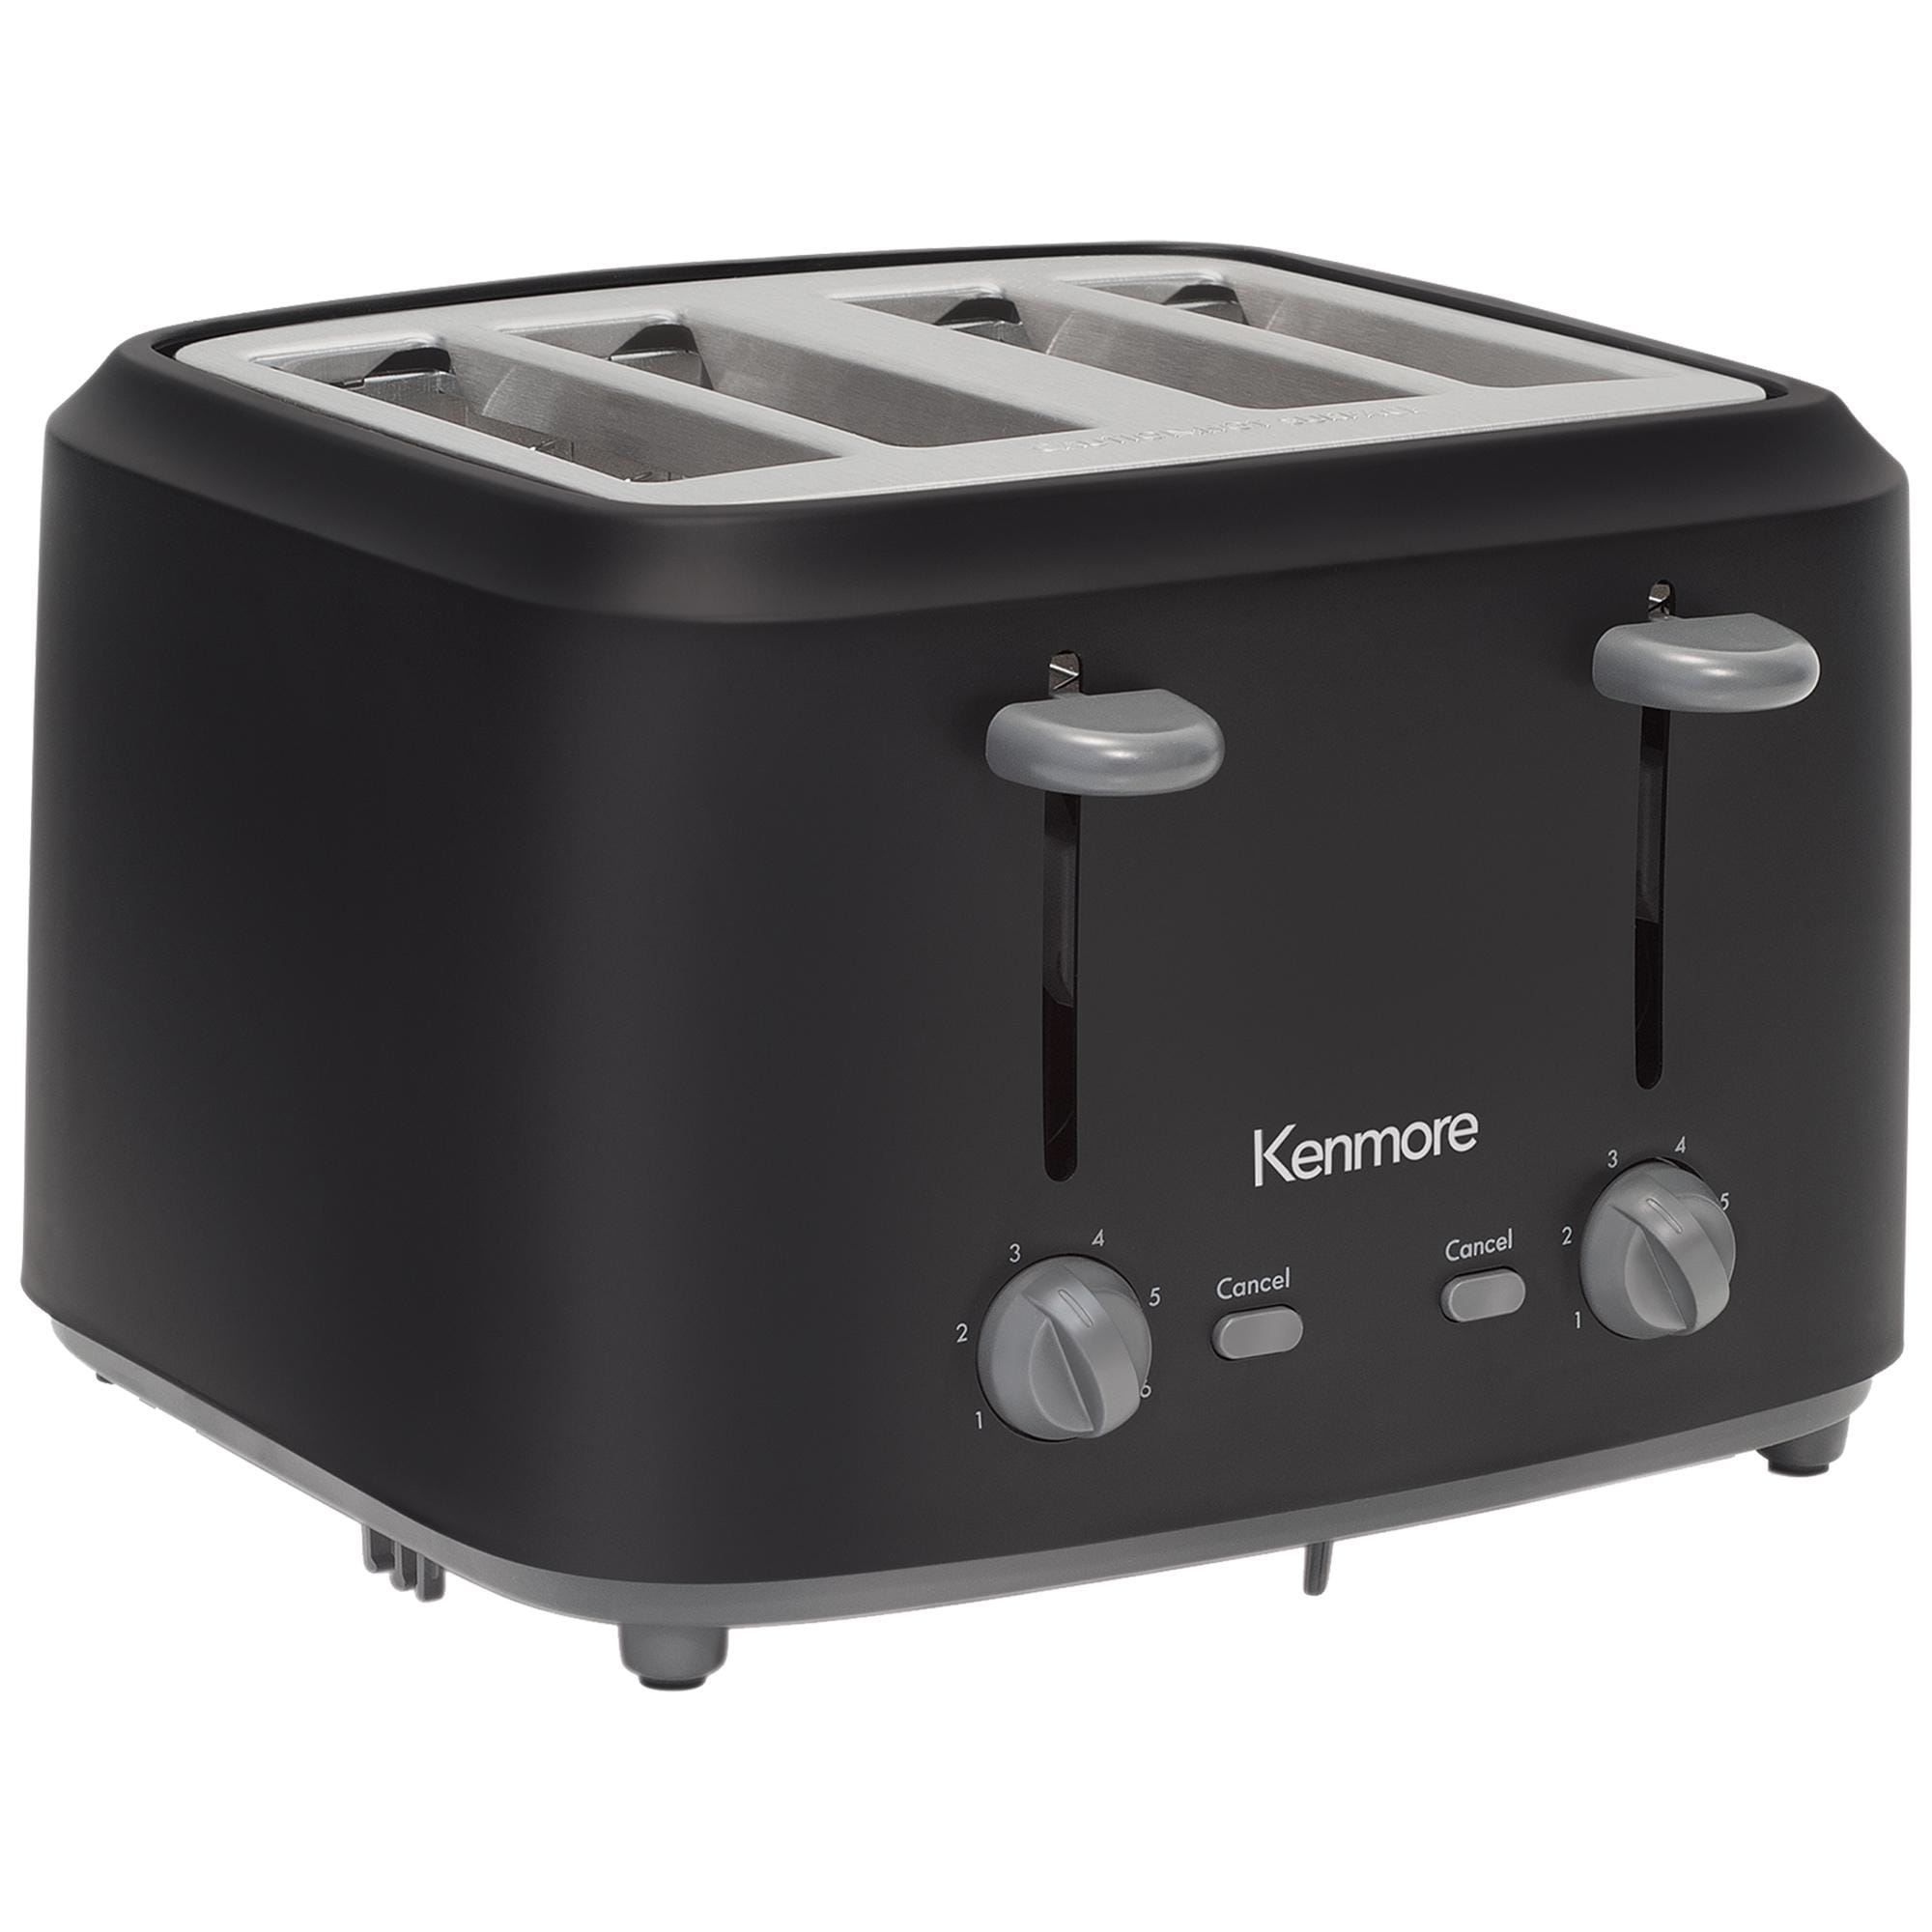 Kenmore 4-Slice Toaster with Dual Controls, Matte Black and Gray, Wide Slots, Adjustable Browning